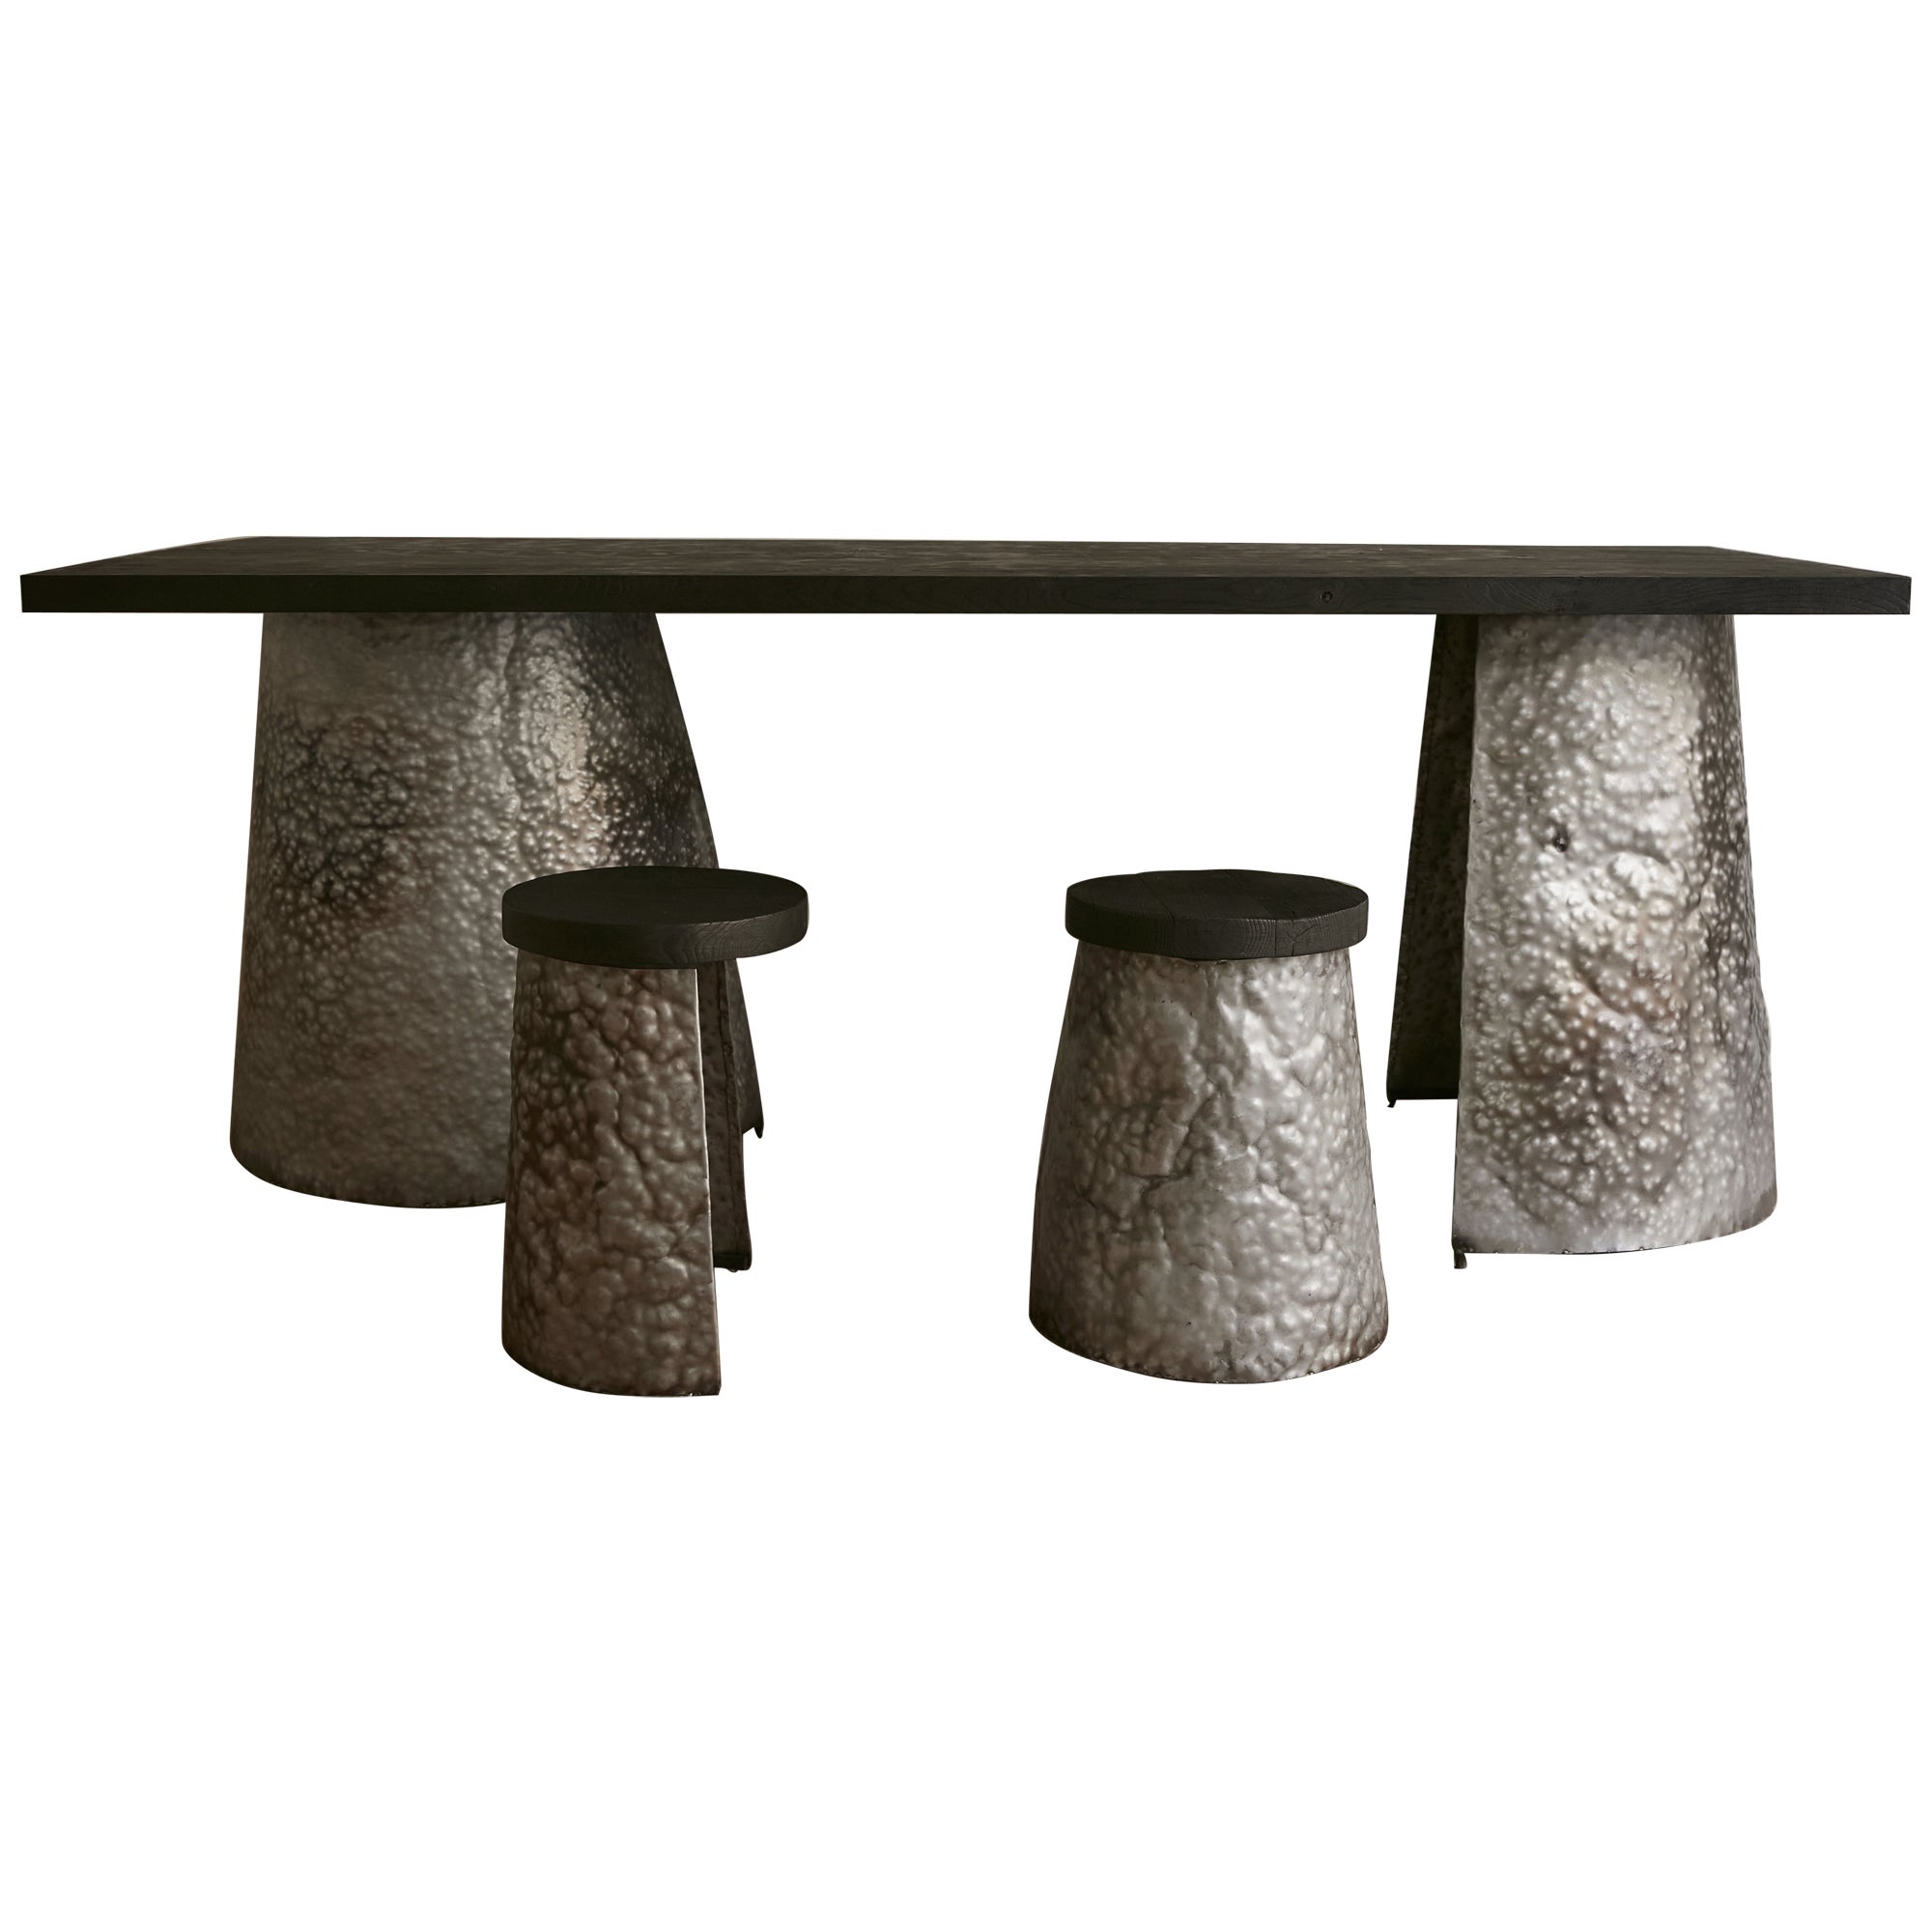 Bruo hammered steel & burned wood dining table and stools, contemporary handmade